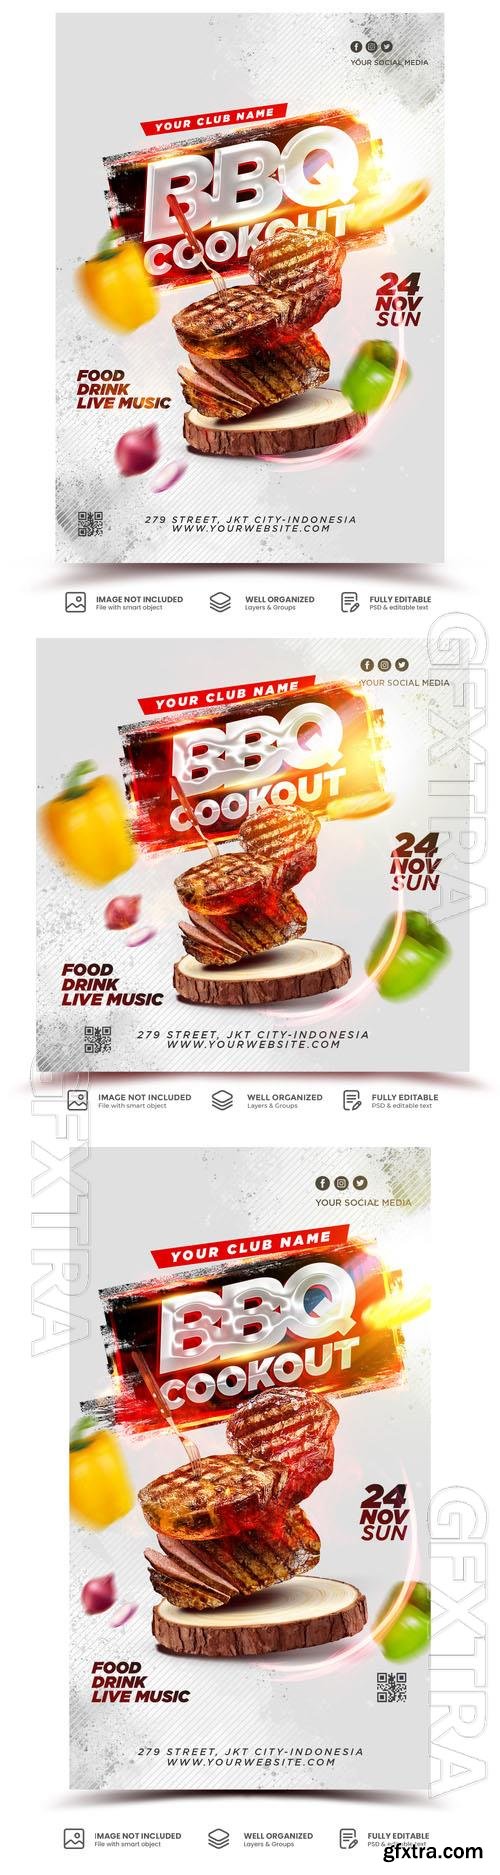 PSD flyer template for a bbq cookout food menu promotion